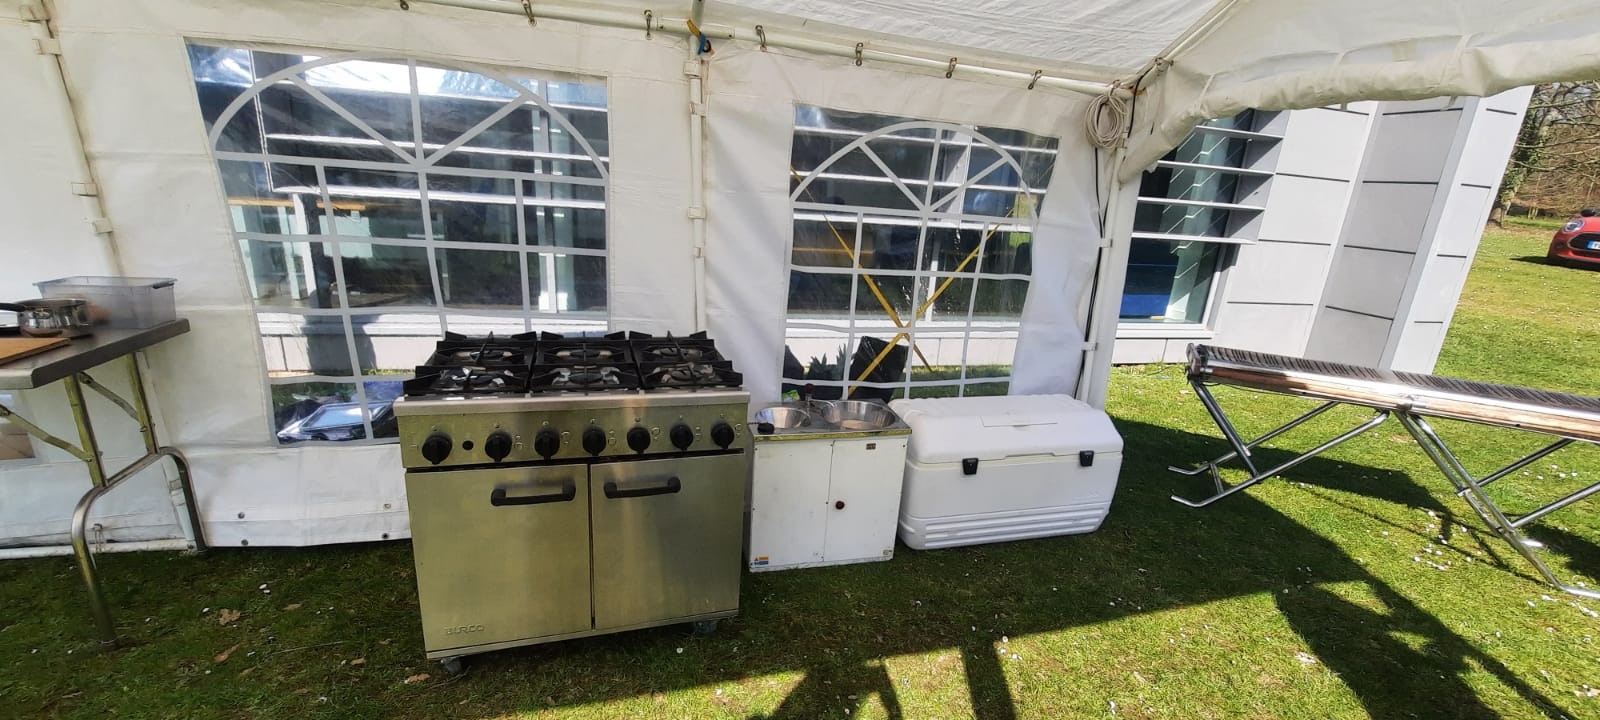 6 Burner gas range oven with cool box inside a marquee